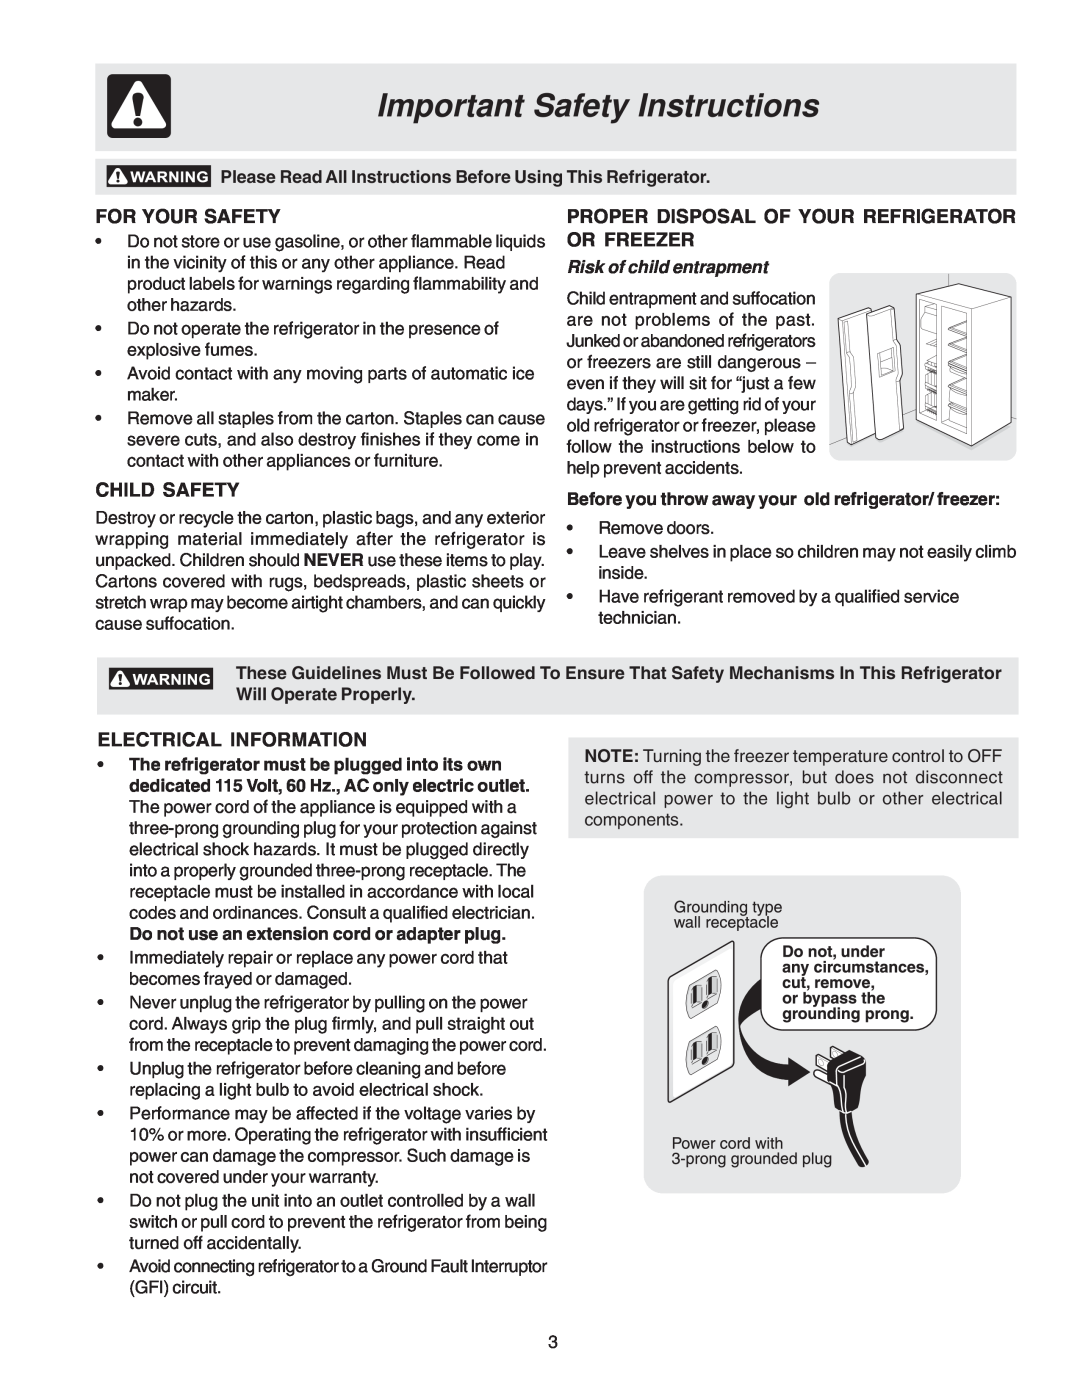 Frigidaire FRS26KF7AQ0 Important Safety Instructions, For Your Safety, Proper Disposal Of Your Refrigerator Or Freezer 